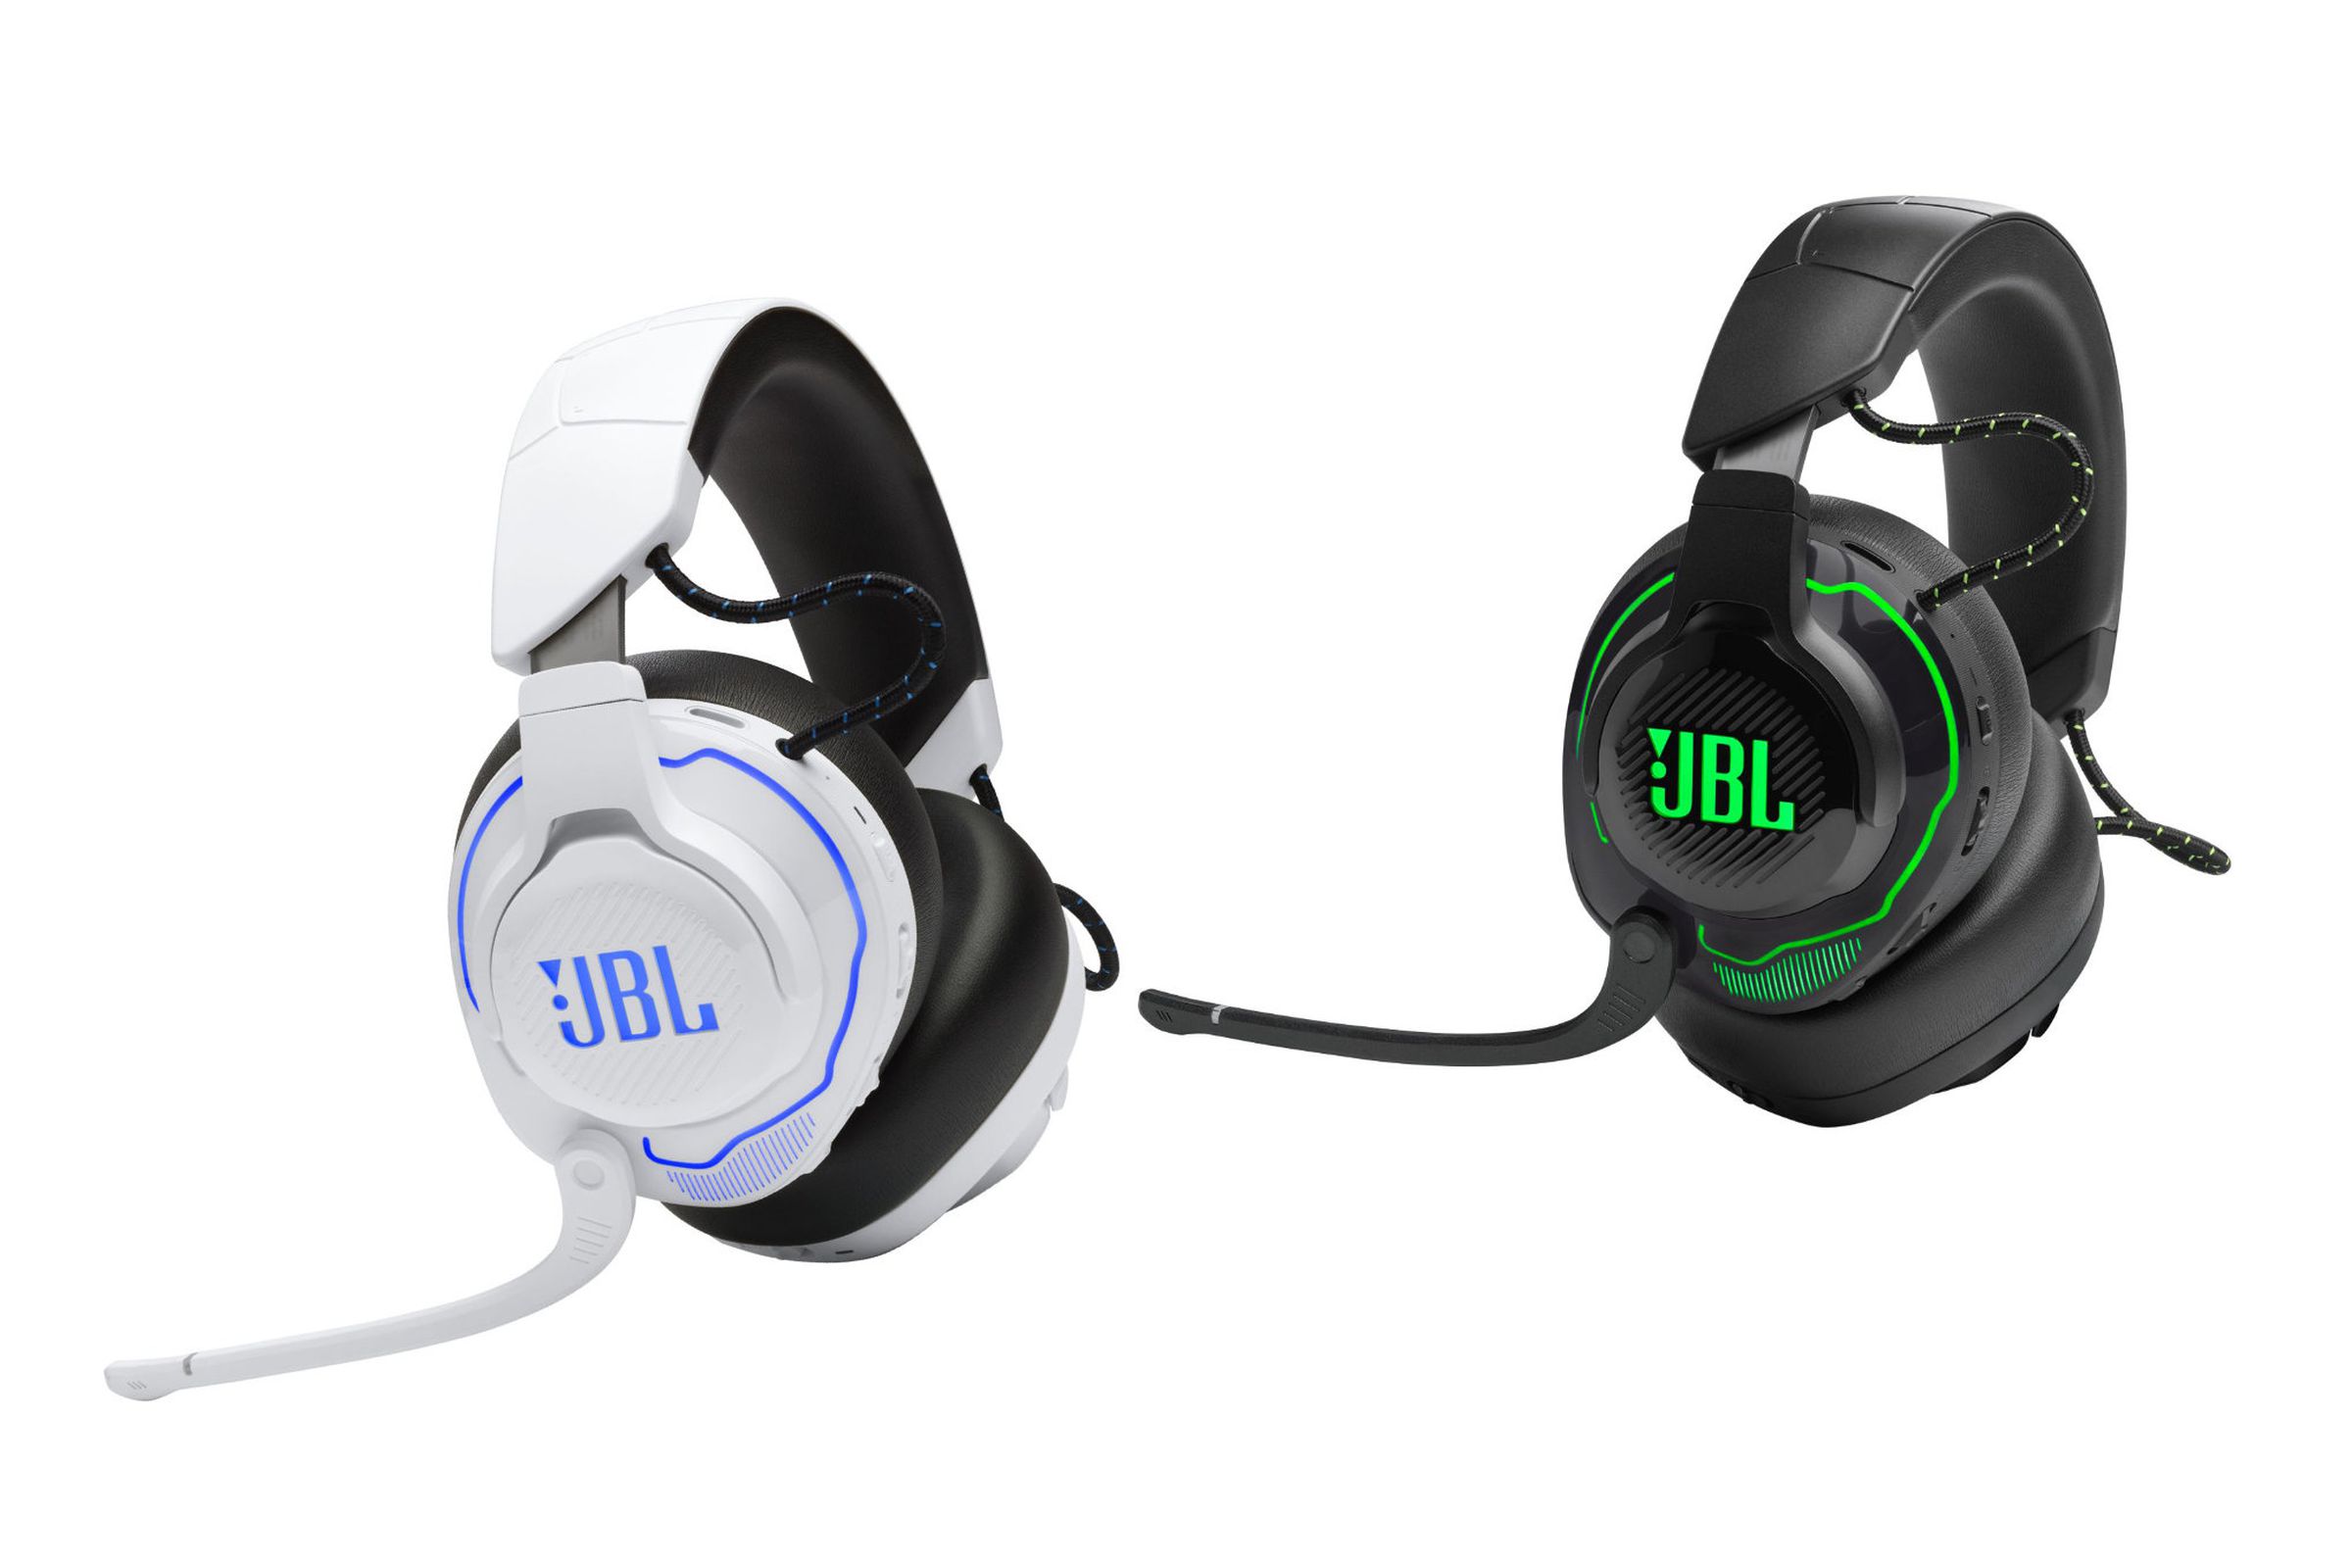 The JBL Quantum 910P and 910X wireless gaming headsets, which are capable of tracking your head during gameplay for more immersive audio.